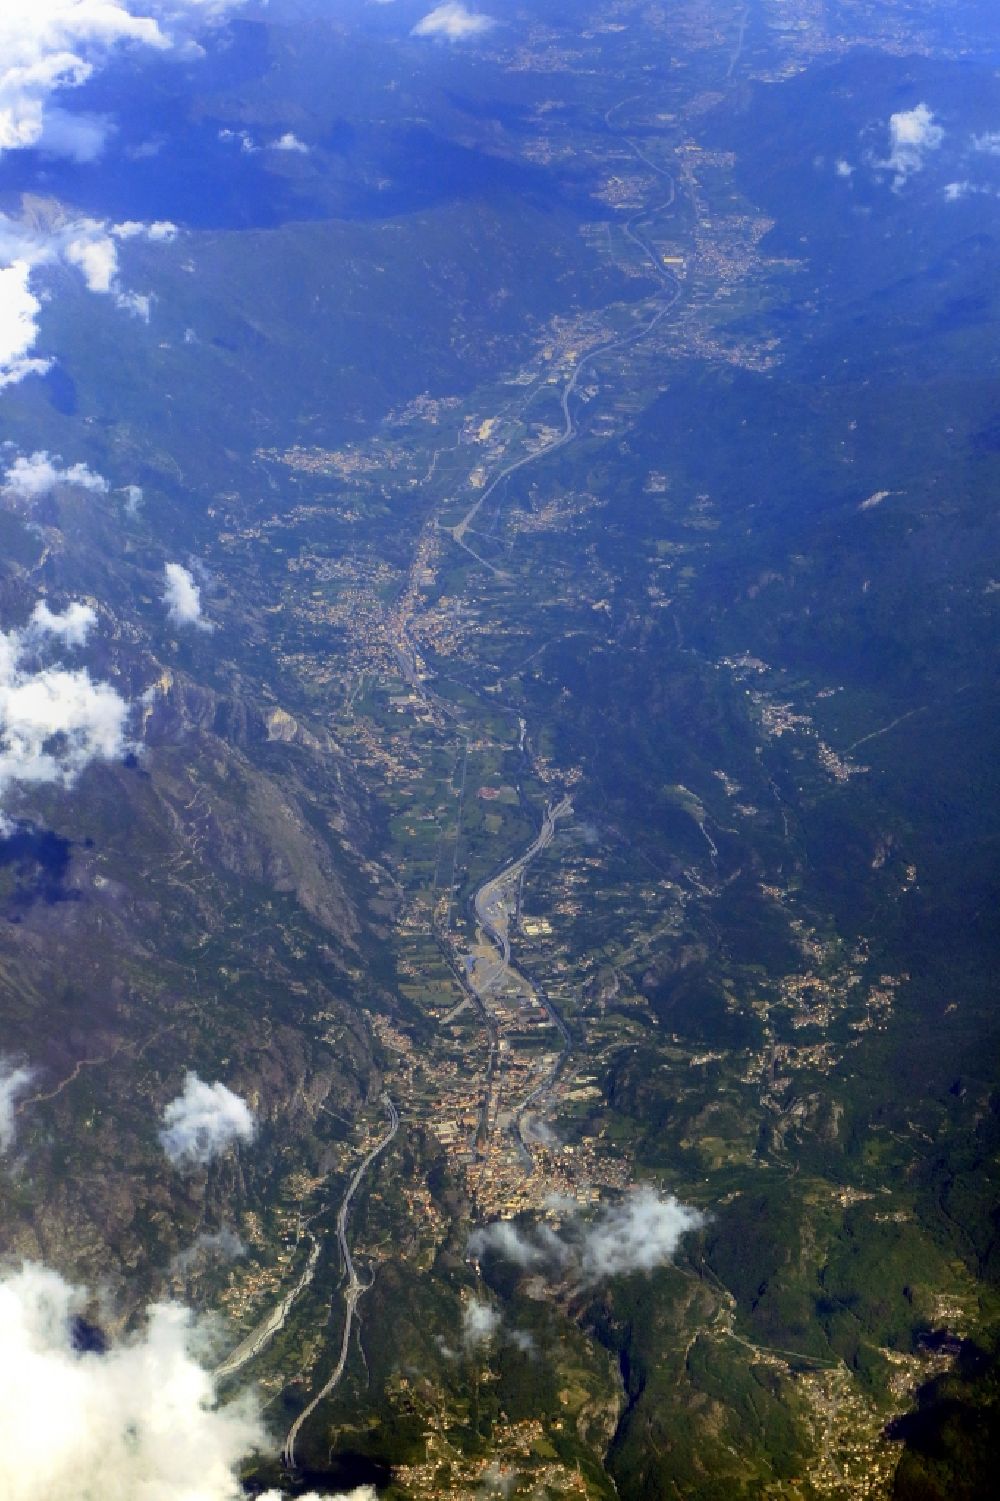 Aerial image Susa - Location view of the streets and houses in the valley landscape Val di Susa surrounded by mountains in Susa in Piemont, Italy